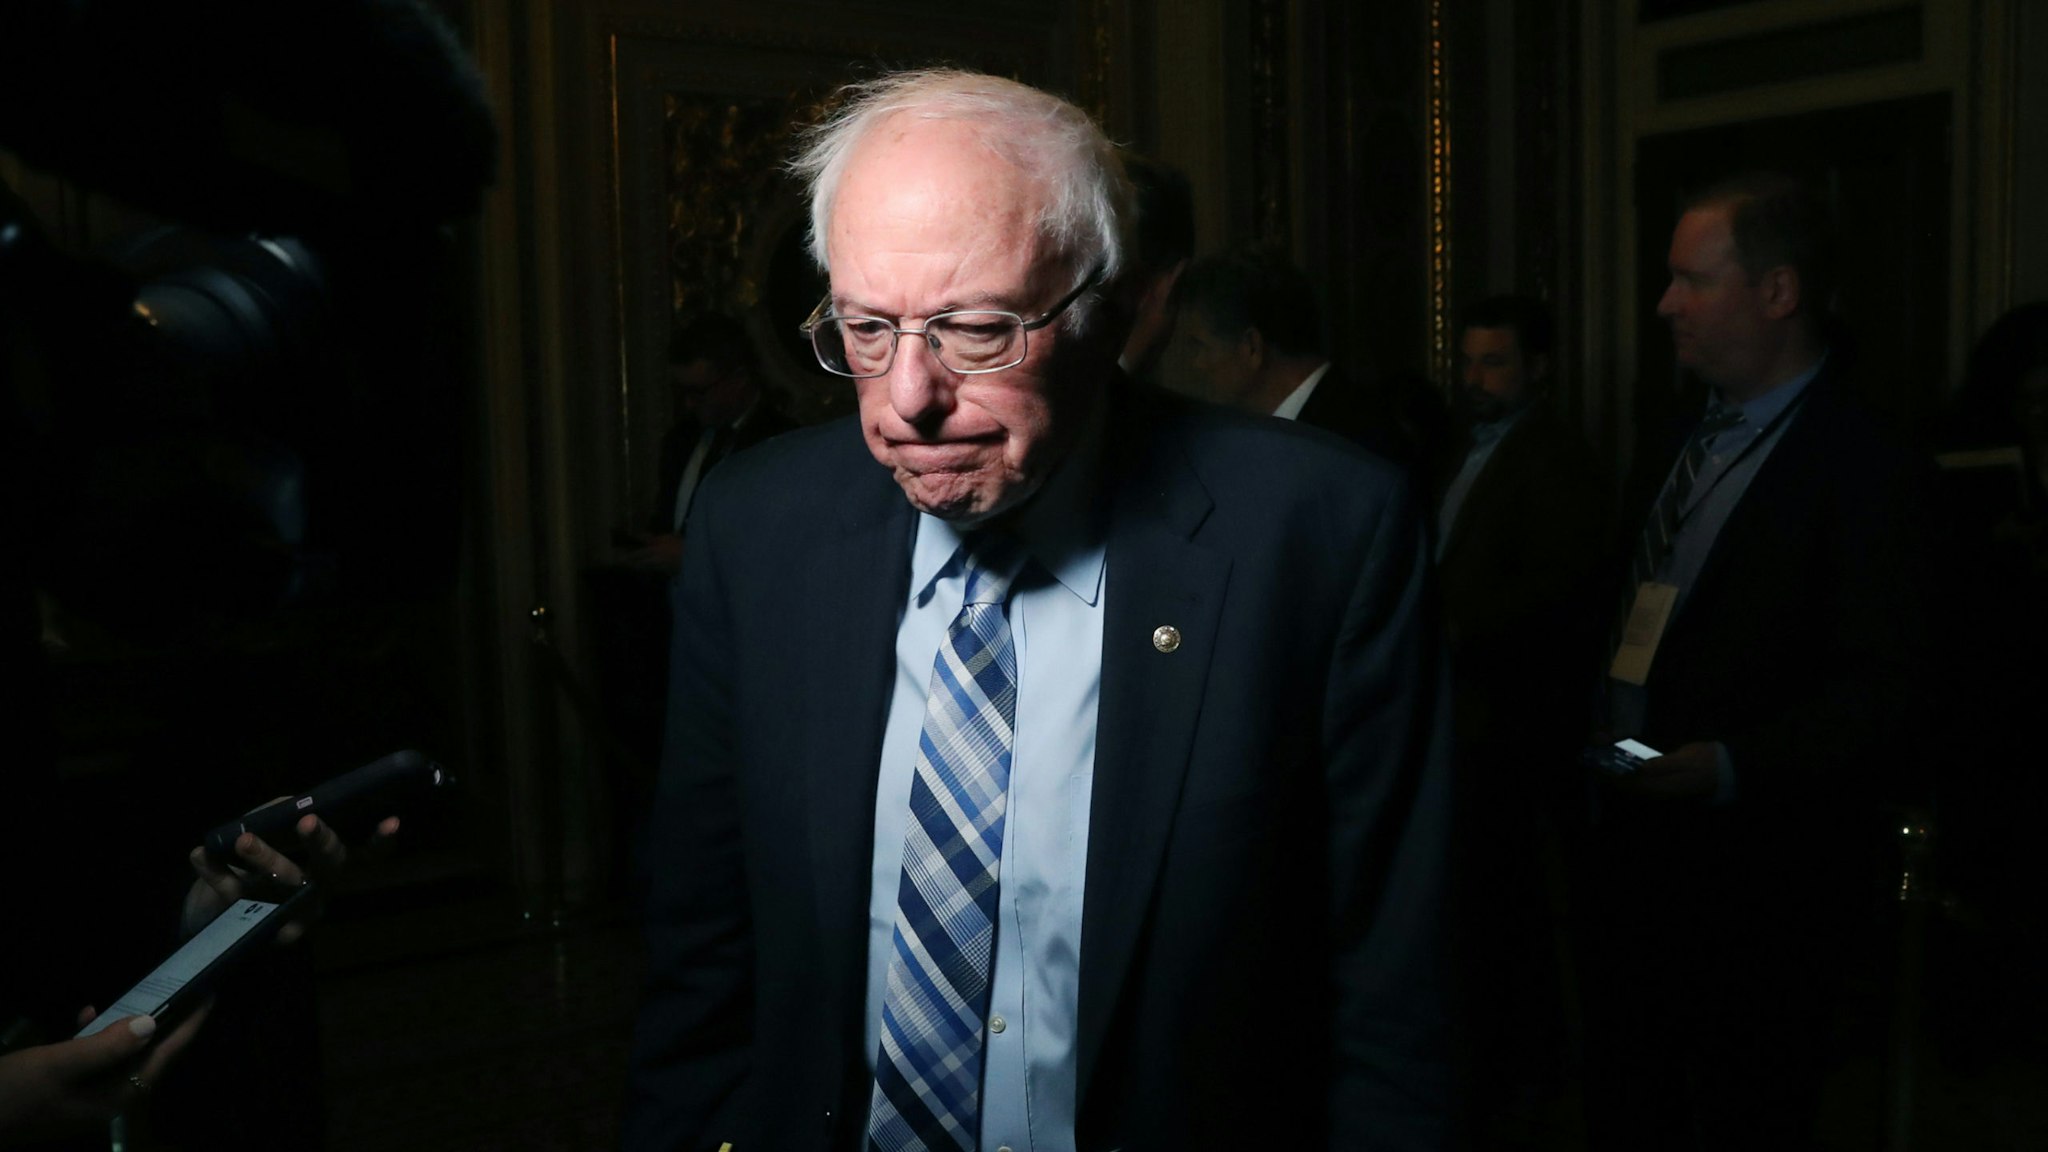 Sen. Bernie Sanders (I-VT) talks to reporters at the U.S. Capitol January 21, 2020 in Washington, DC. Today marks day one of the Senate impeachment trial against President Trump.